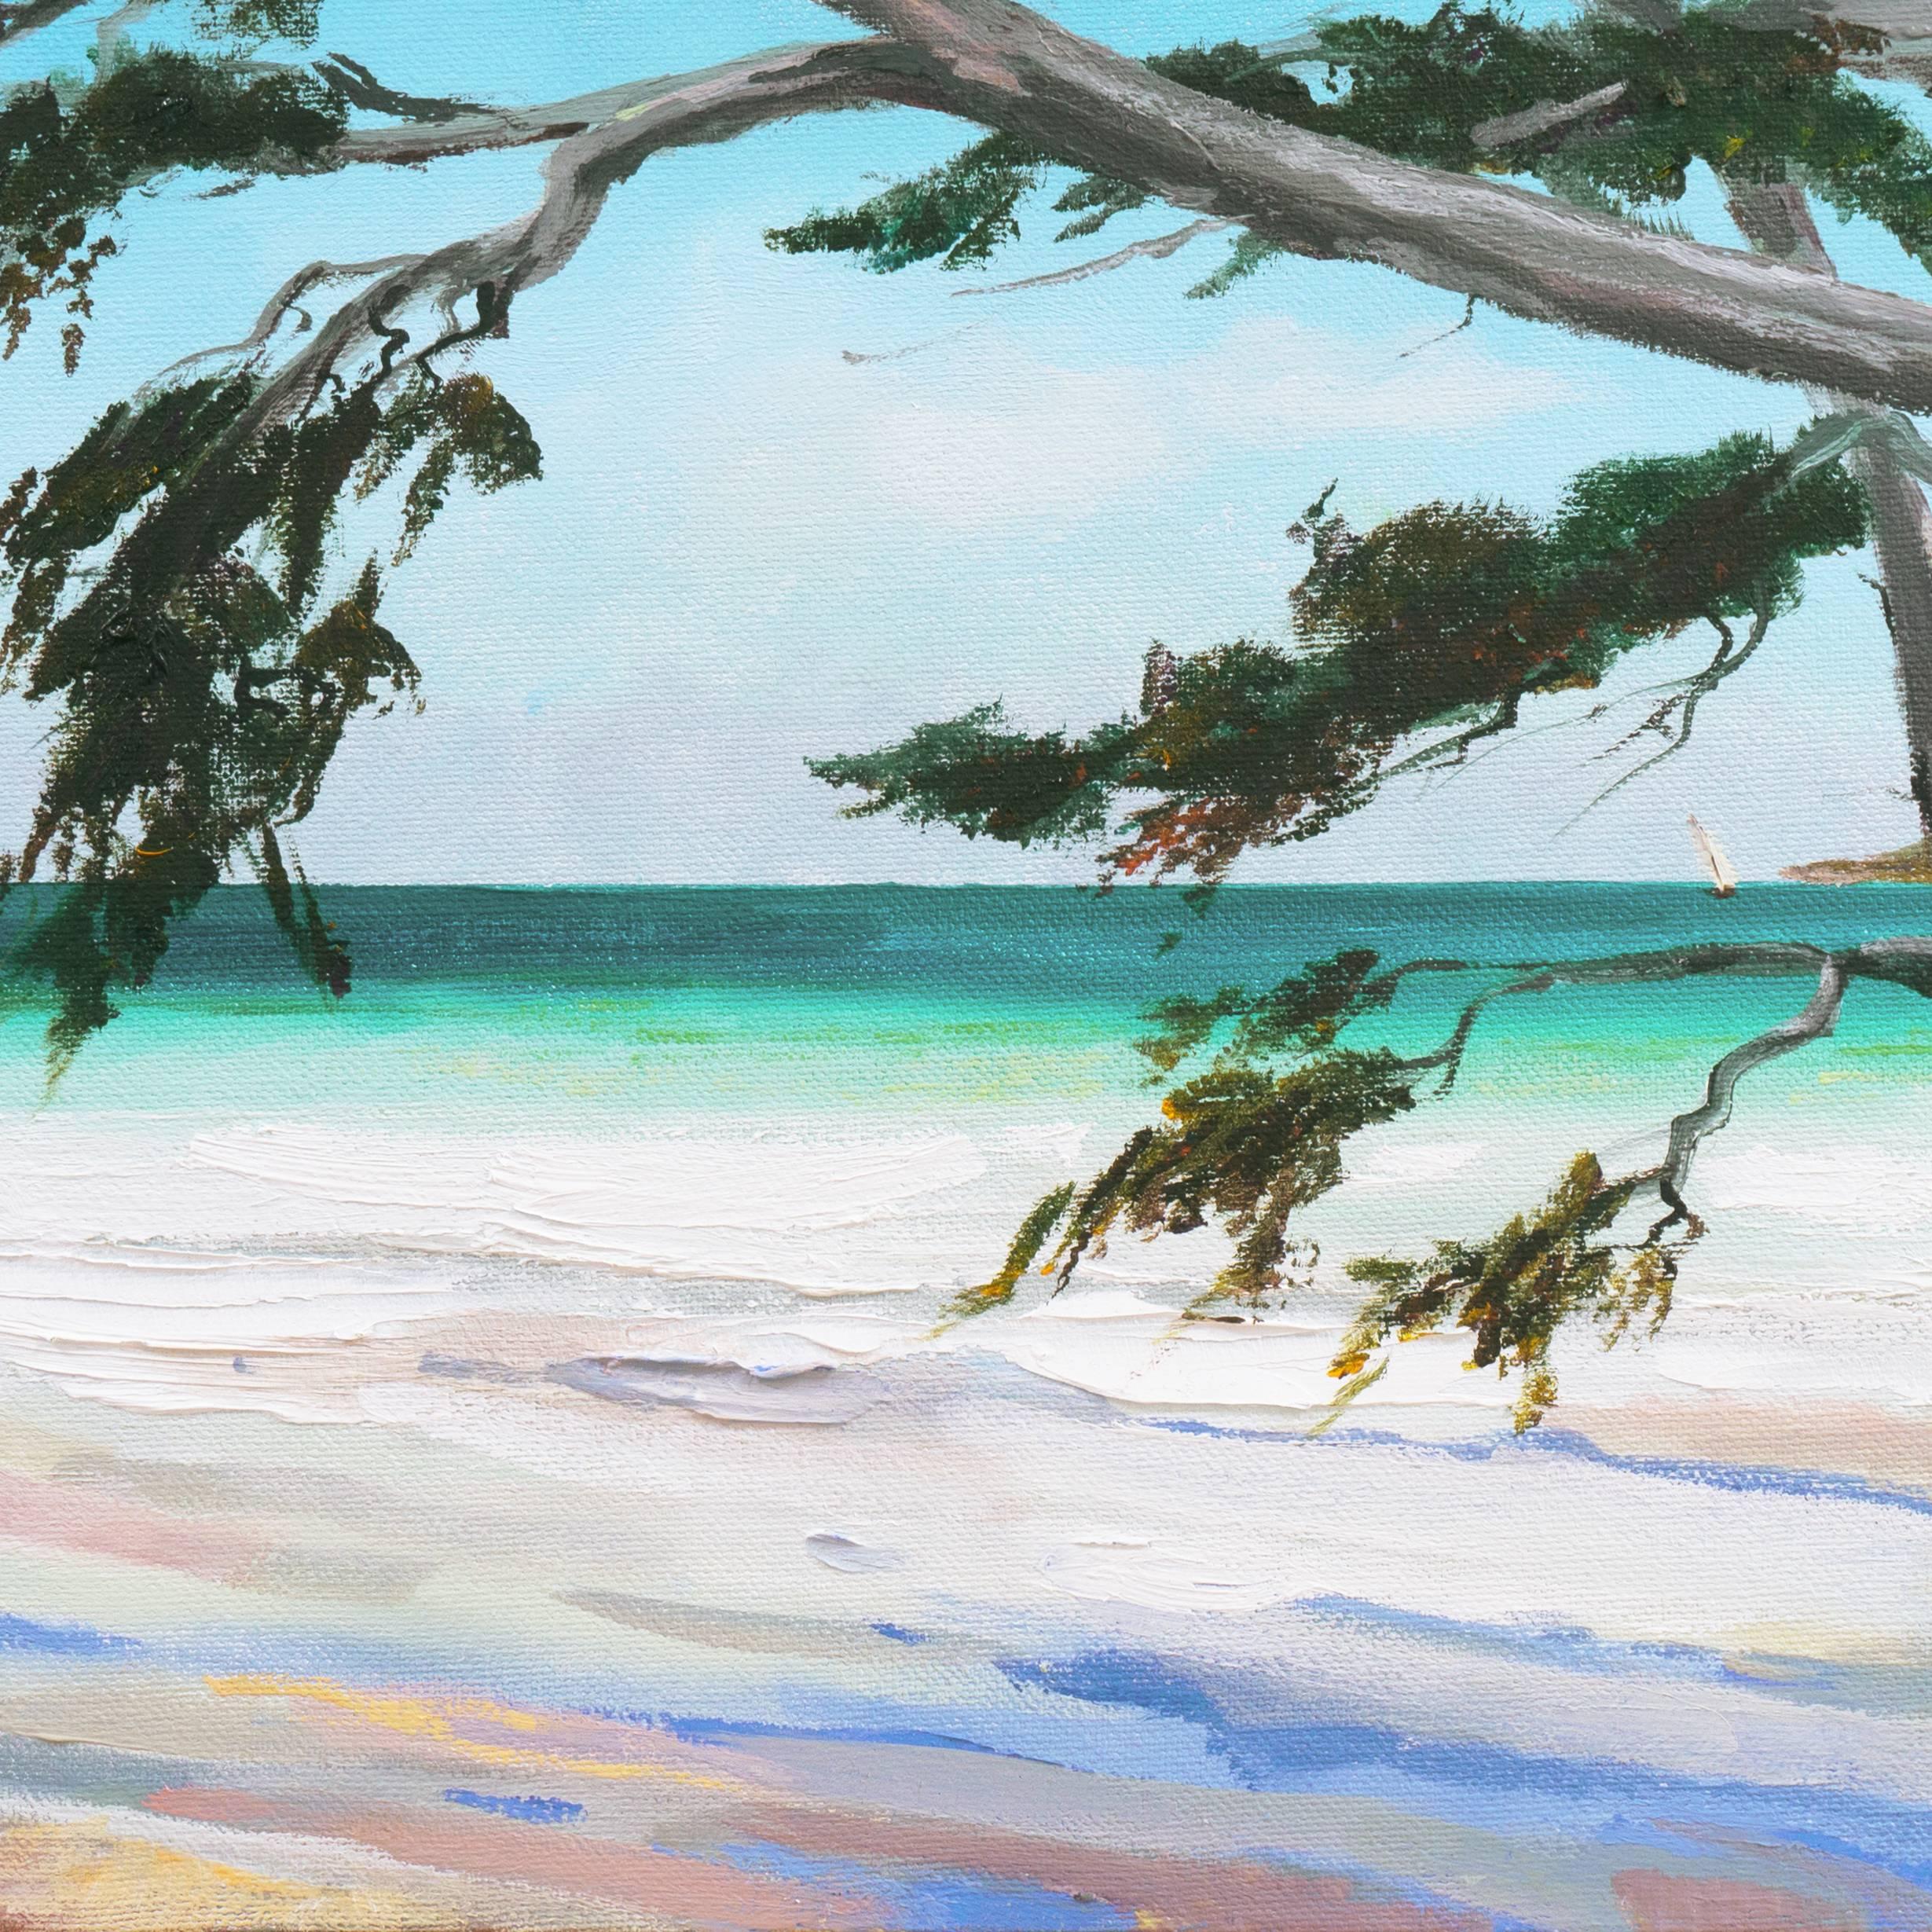 A vibrant California coastal scene showing a view of a deserted, white sand beach with a distant sailboat visible through the branches of an elegant Cypress tree. 

Signed lower right, 'Murray' and painted circa 2015.

Born in Los Angeles, this